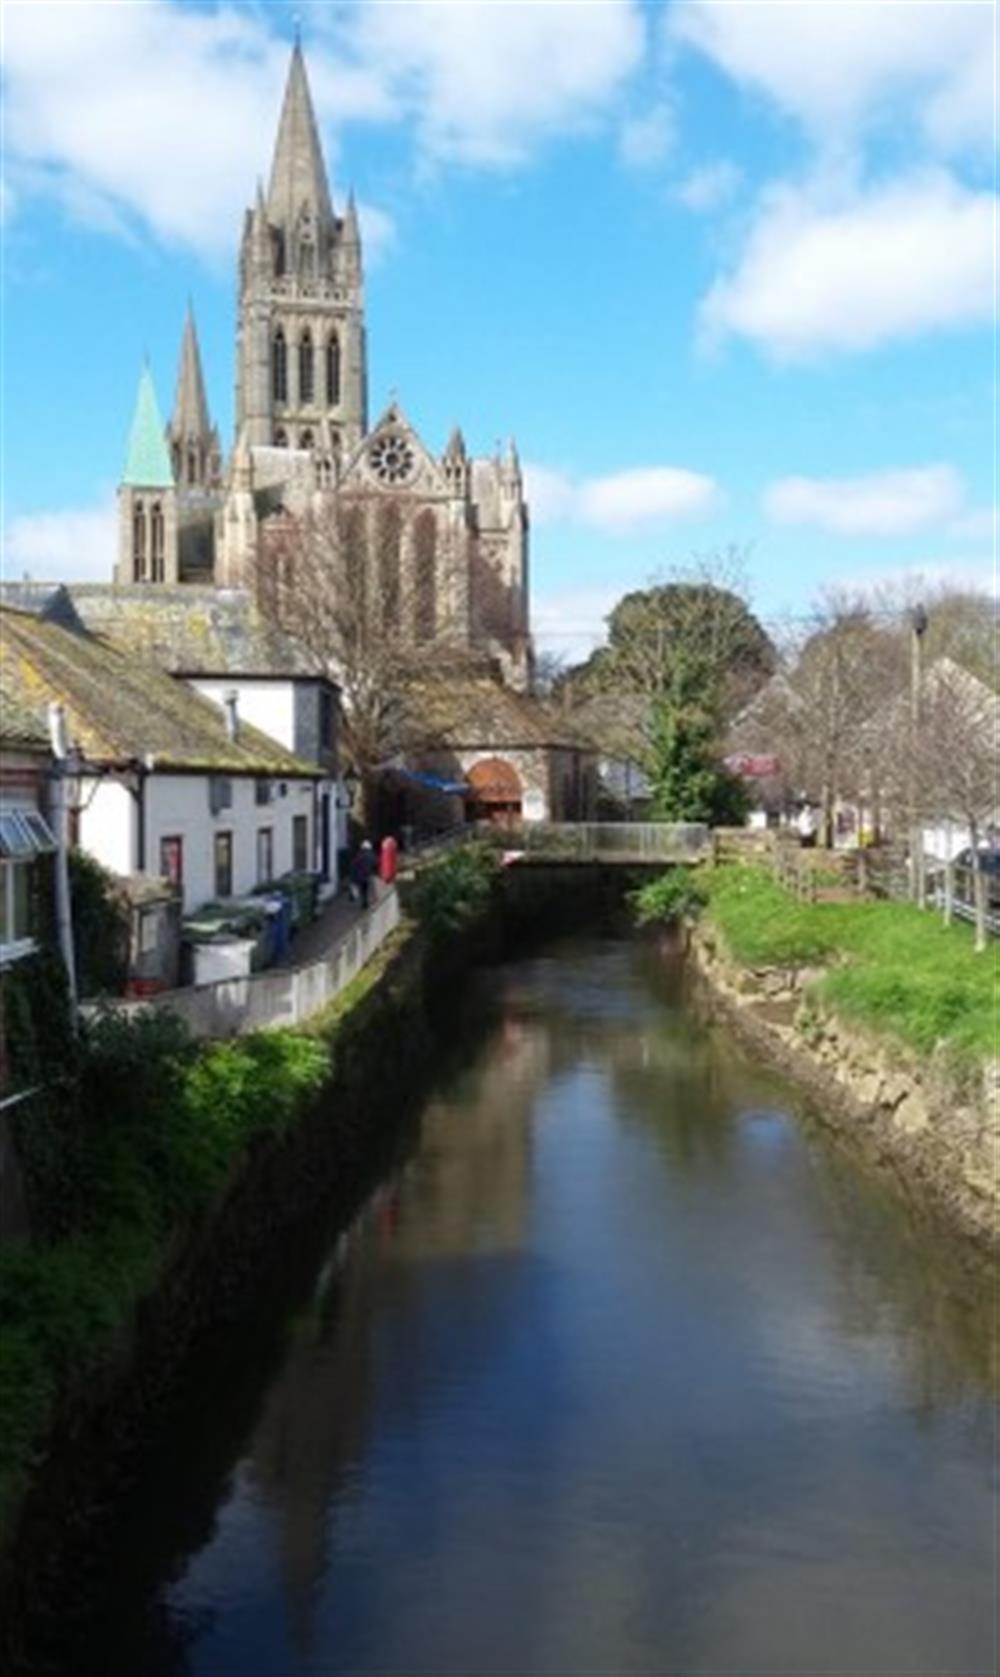 Truro is our main shopping centre but also great for pubs, cafes and a wander around the beautiful cathedral.